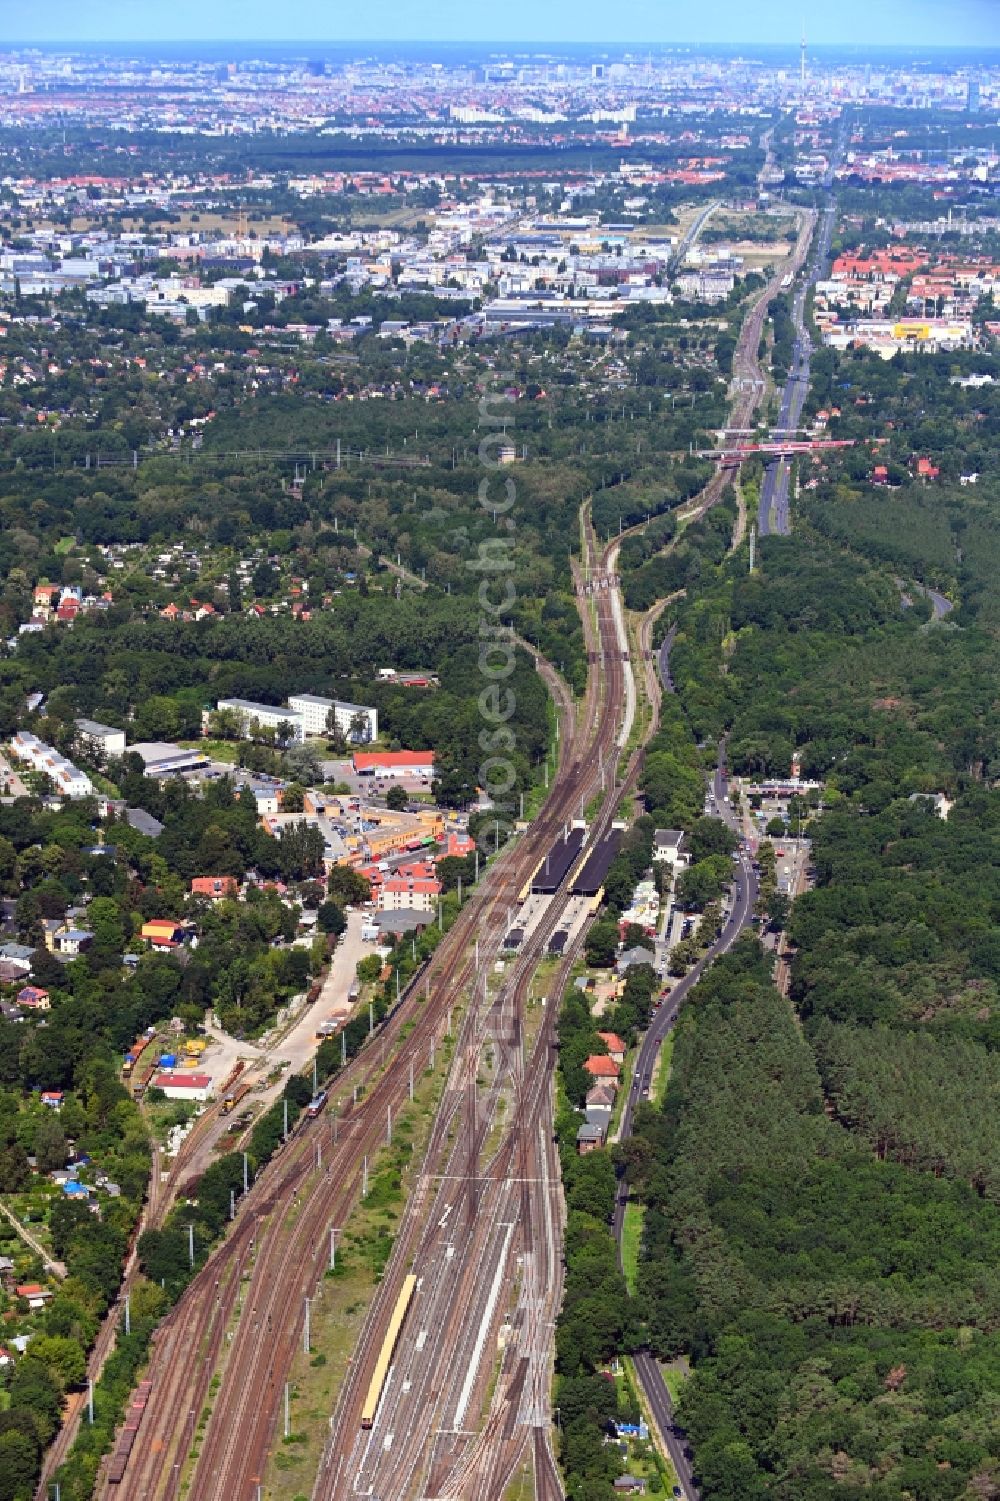 Aerial image Berlin - Station building and track systems of the S-Bahn station in the district Gruenau in Berlin, Germany